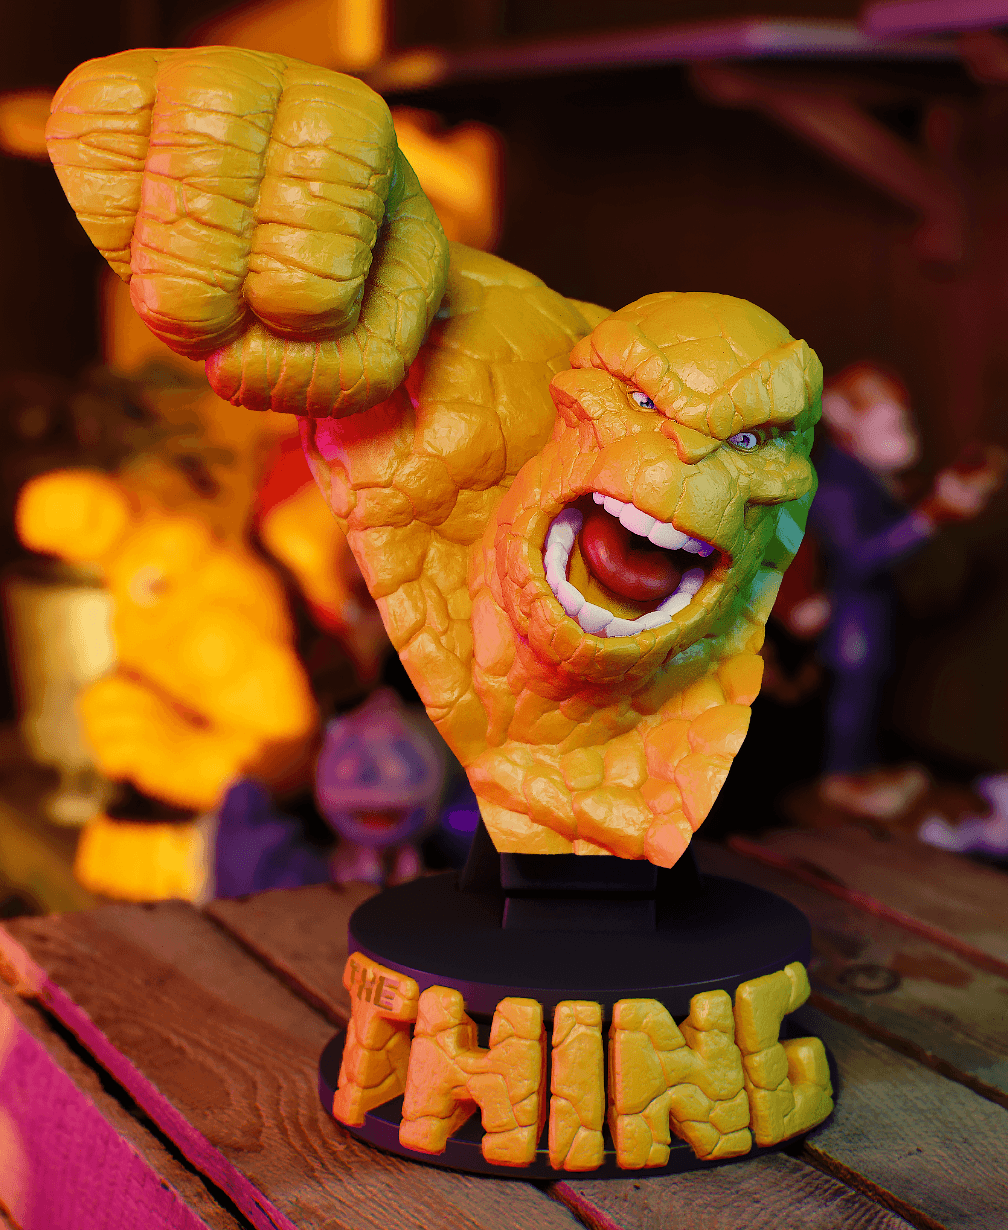 The Thing Bust XL 3d model